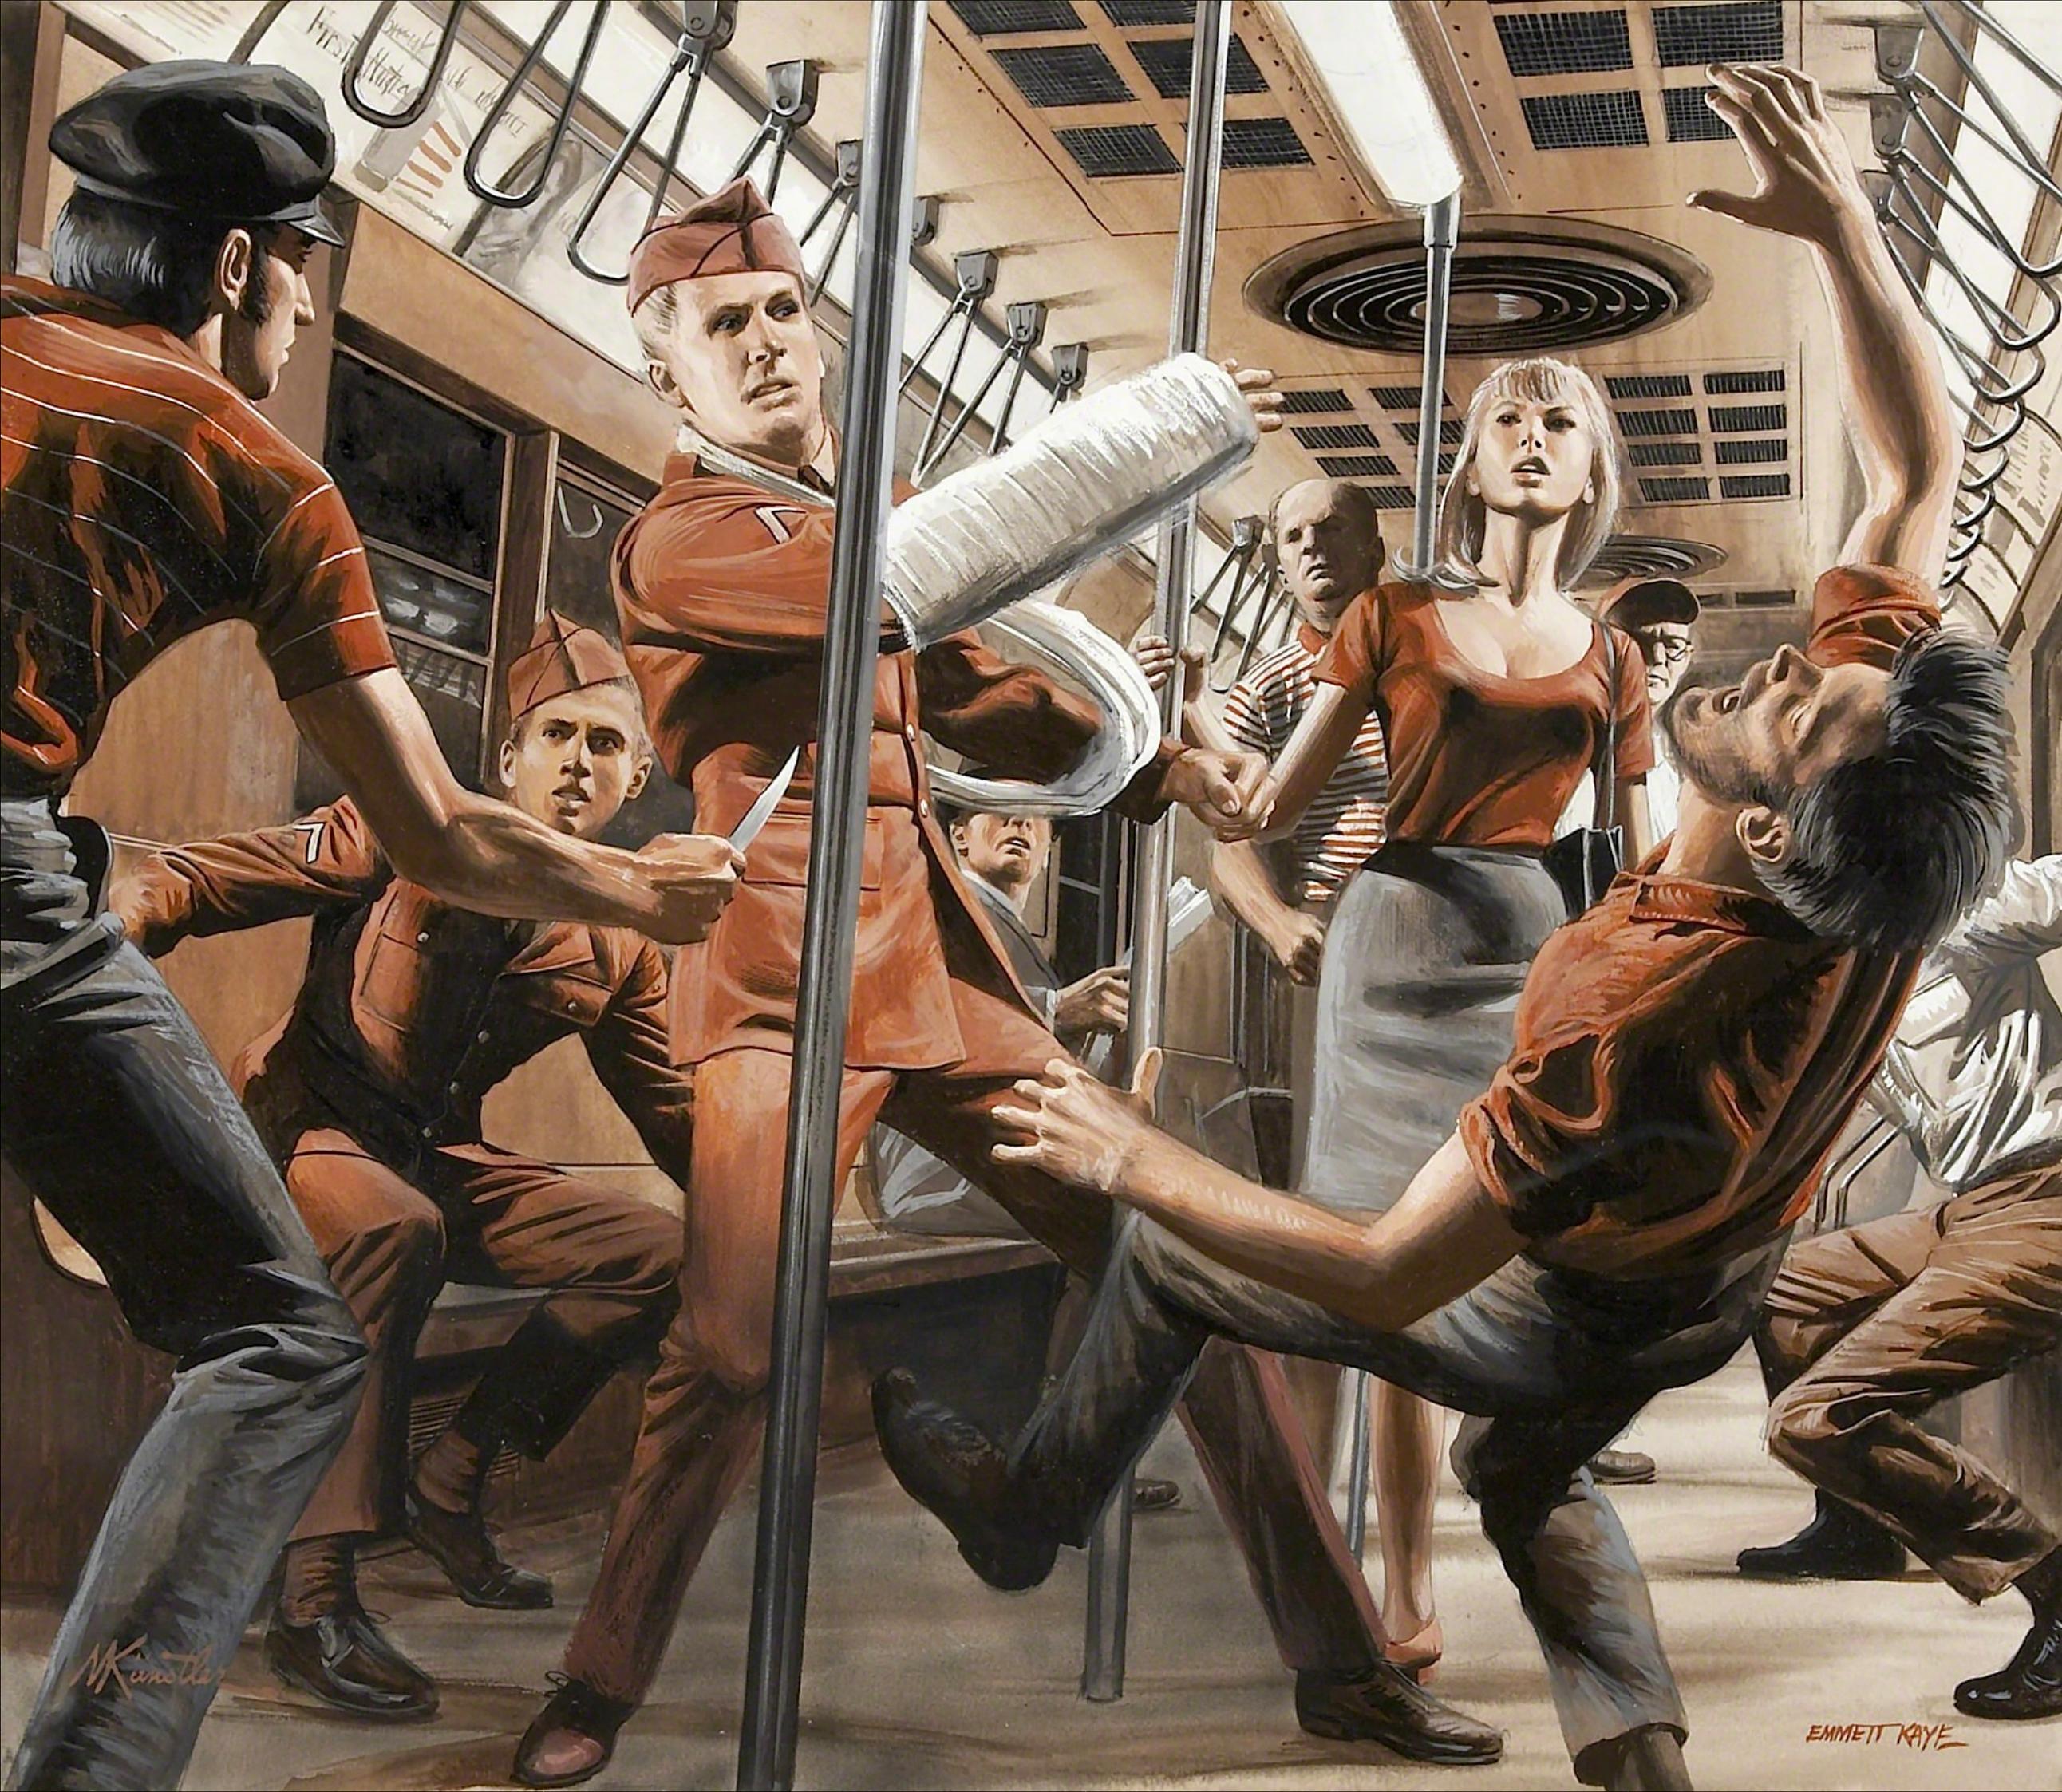 Soldier Beats Up Muggers on Subway - Stag Magazine story illustration